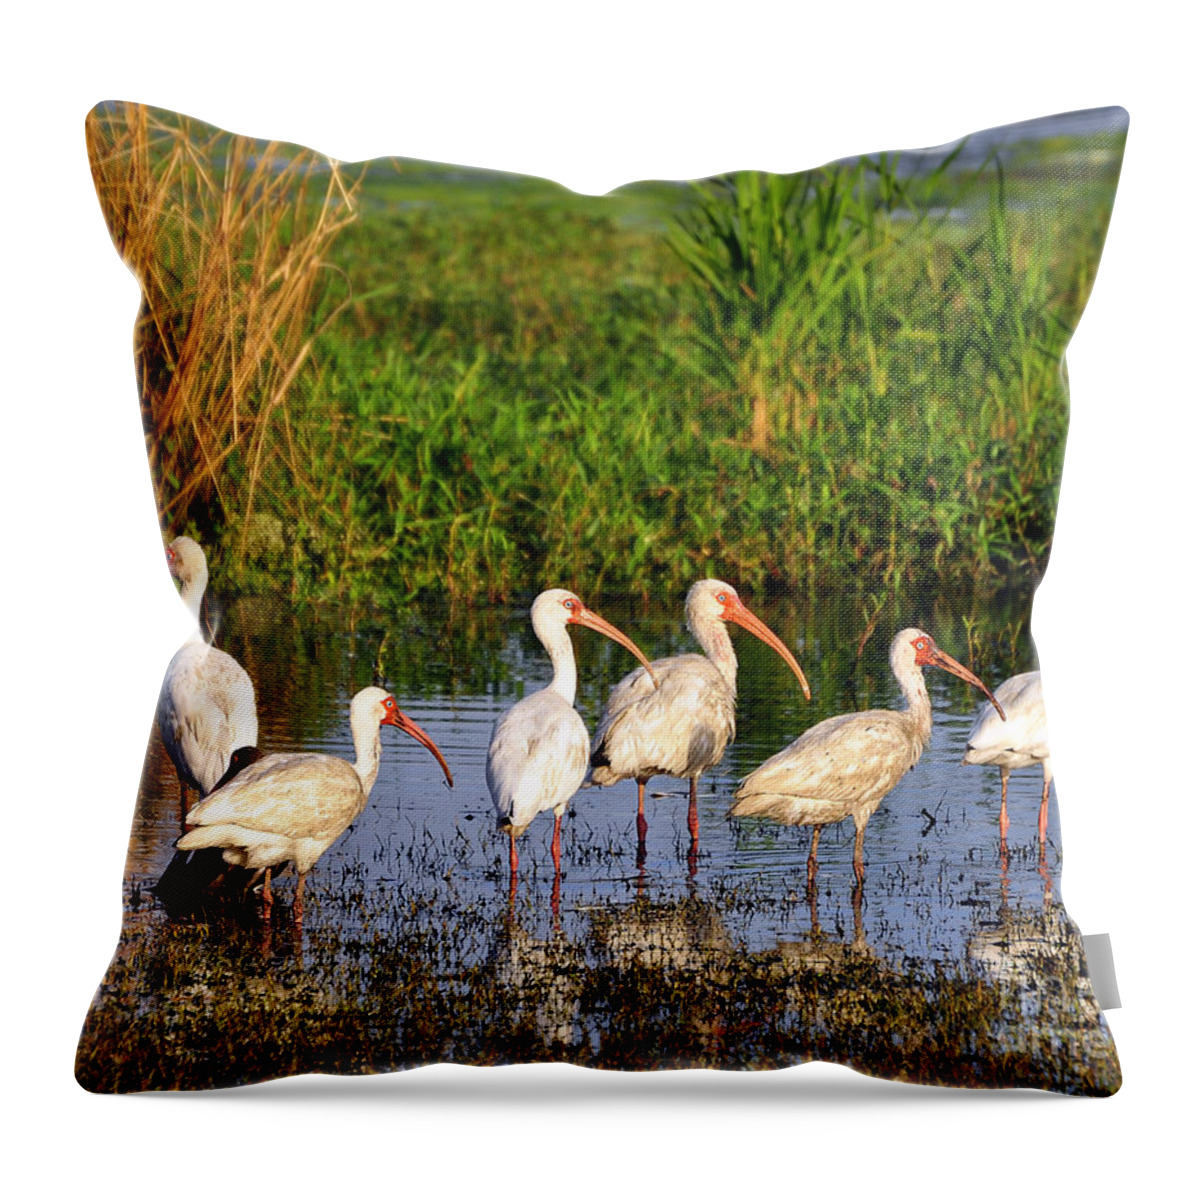 Ibis Throw Pillow featuring the photograph Wading Ibises by Al Powell Photography USA